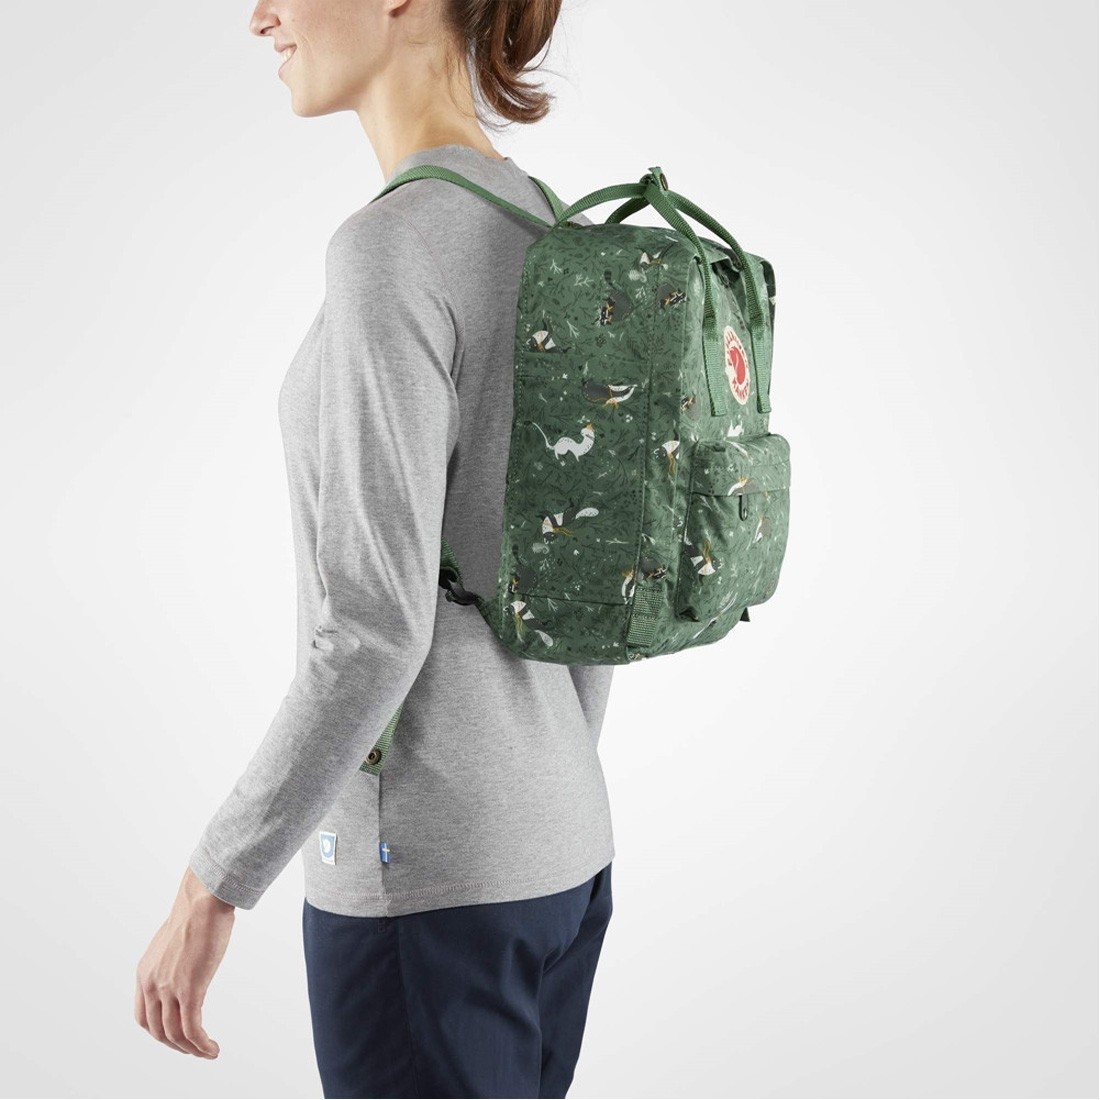 Shop Fjallraven Kanken Art Special Edition Backpack - Green Fable -  Fjallraven, delivered to your home | TheOutfit